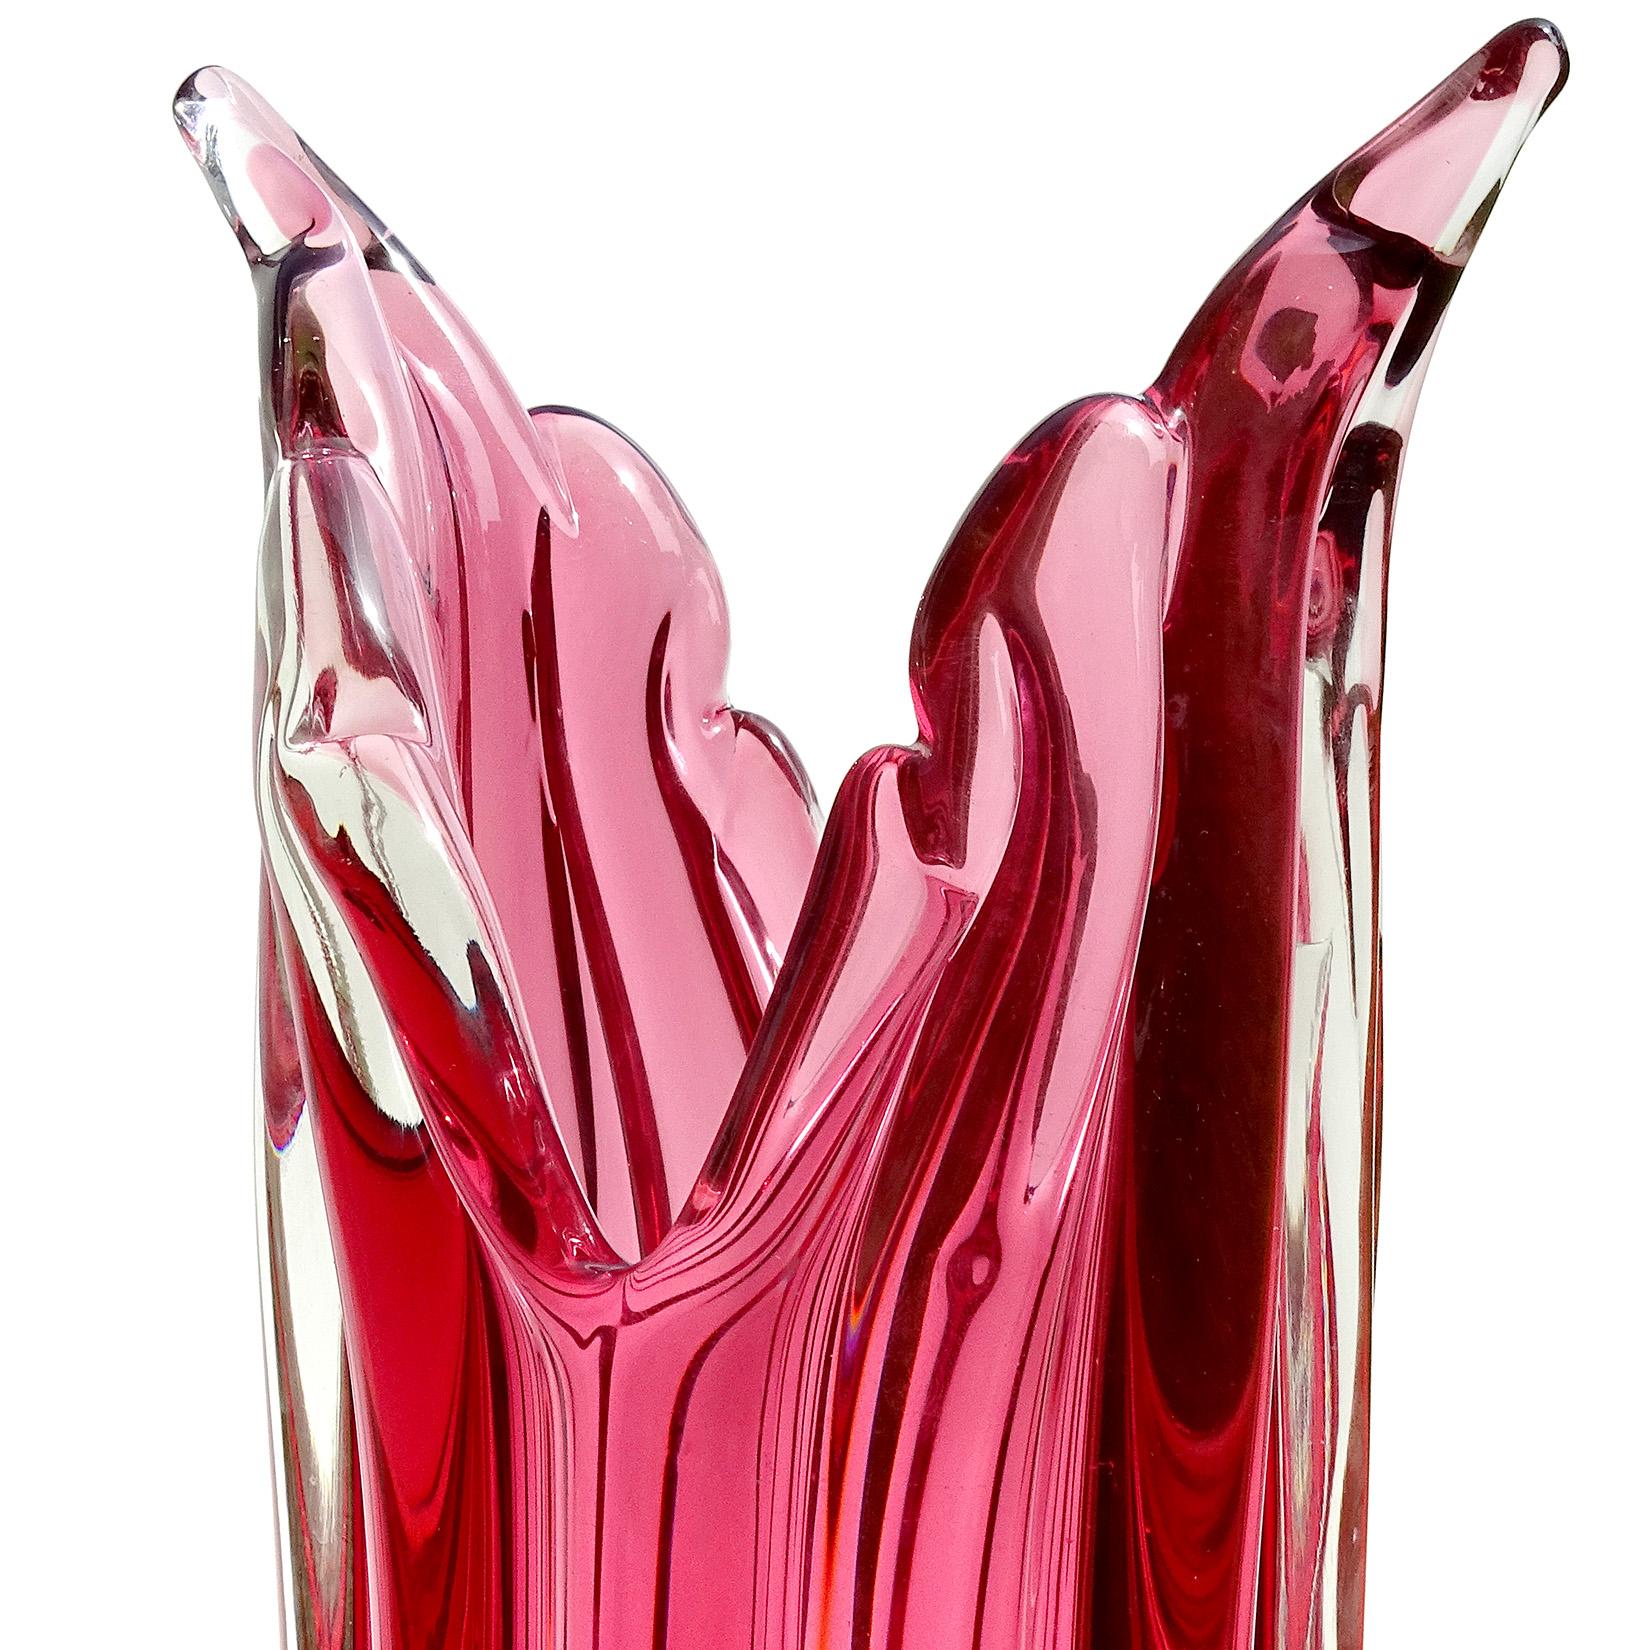 Murano hand blown Sommerso deep pink / red Italian art glass flower vase. Attributed to designer Alfredo Barbini. The piece has a ribbed body, with flared winged rim. Measures: 11 3/4